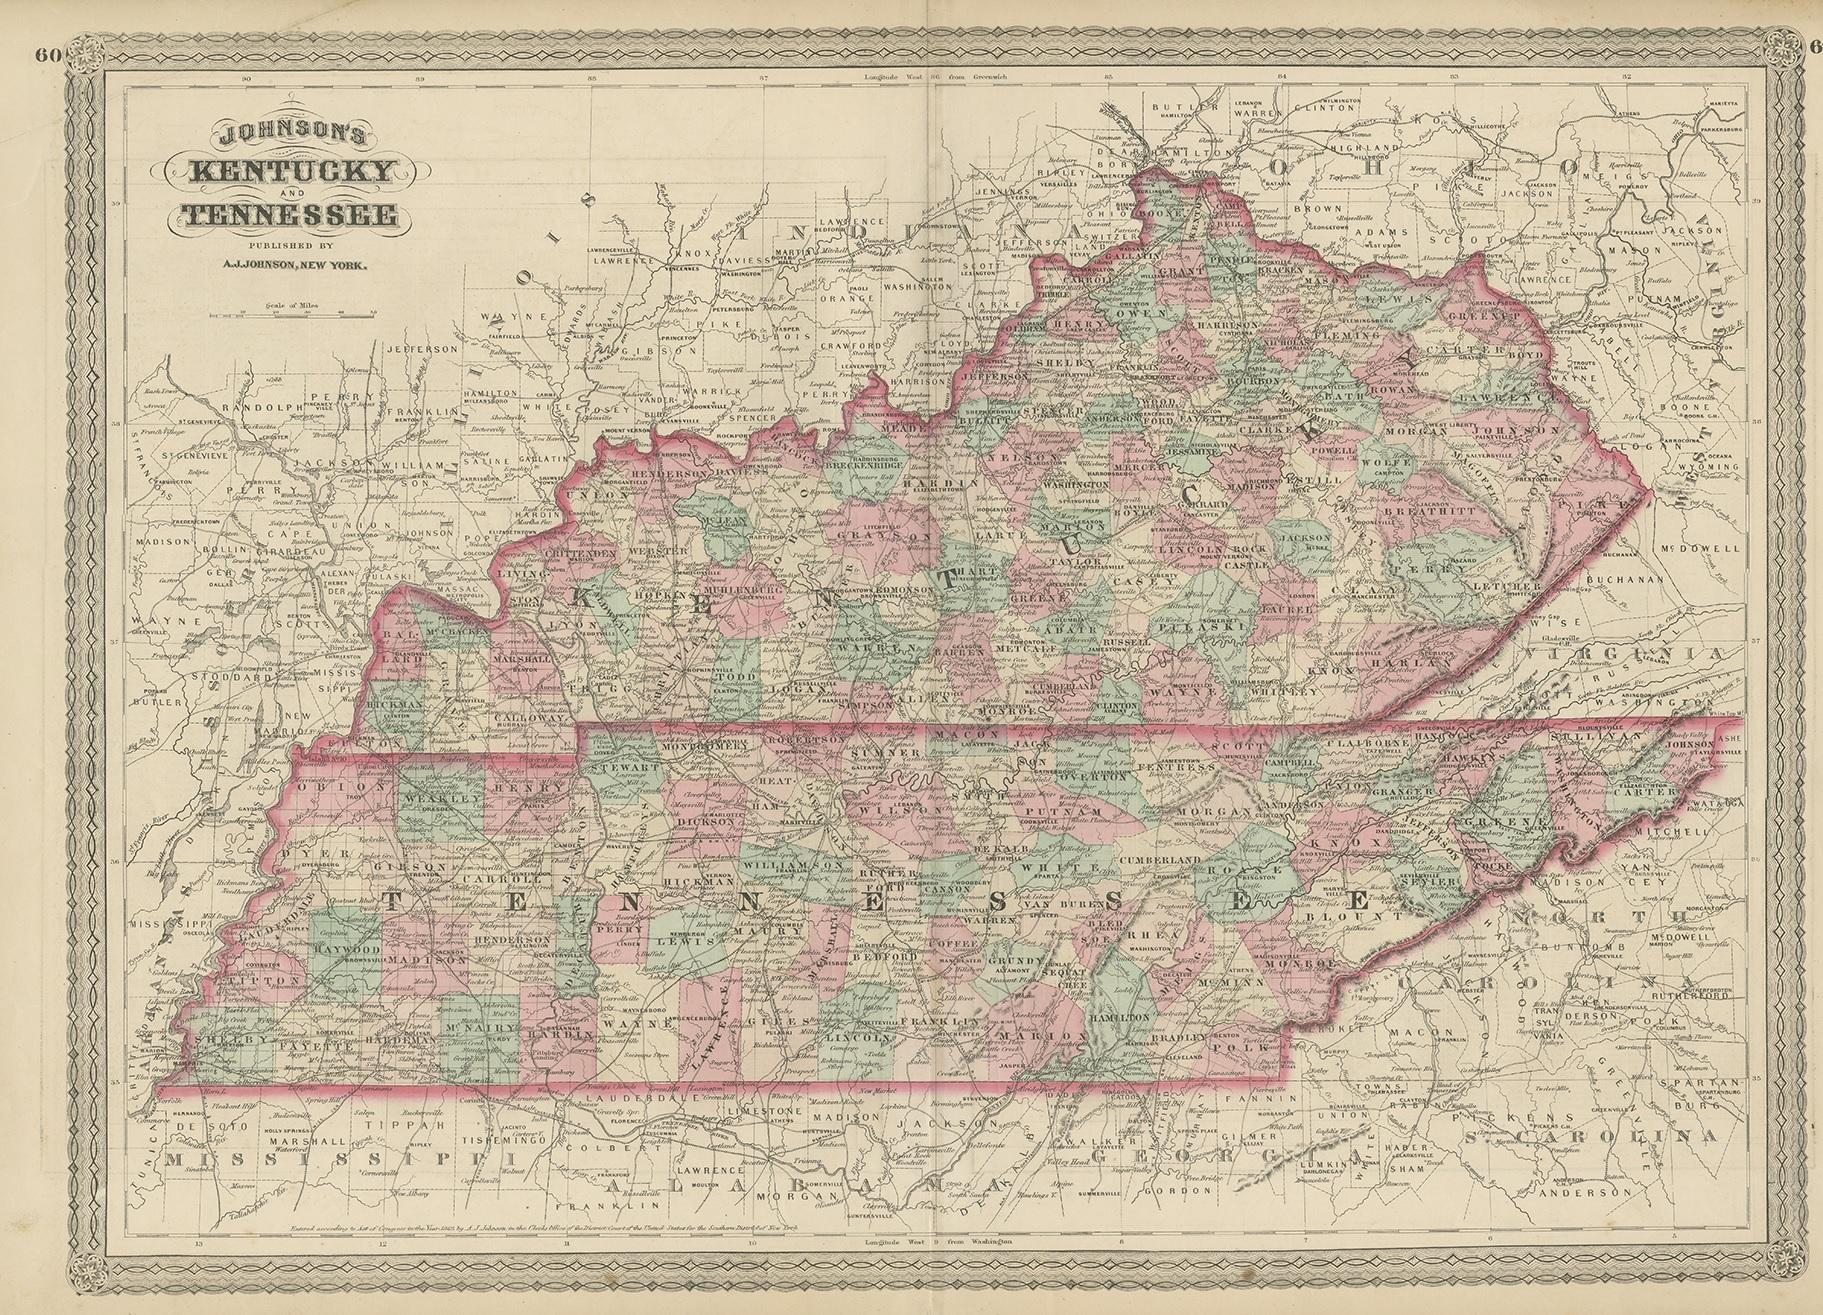 Antique map titled 'Johnson's Kentucky (..)'. Original map of Kentucky and Tennessee. This map originates from 'Johnson's New Illustrated Family Atlas of the World' by A.J. Johnson. Published 1872.